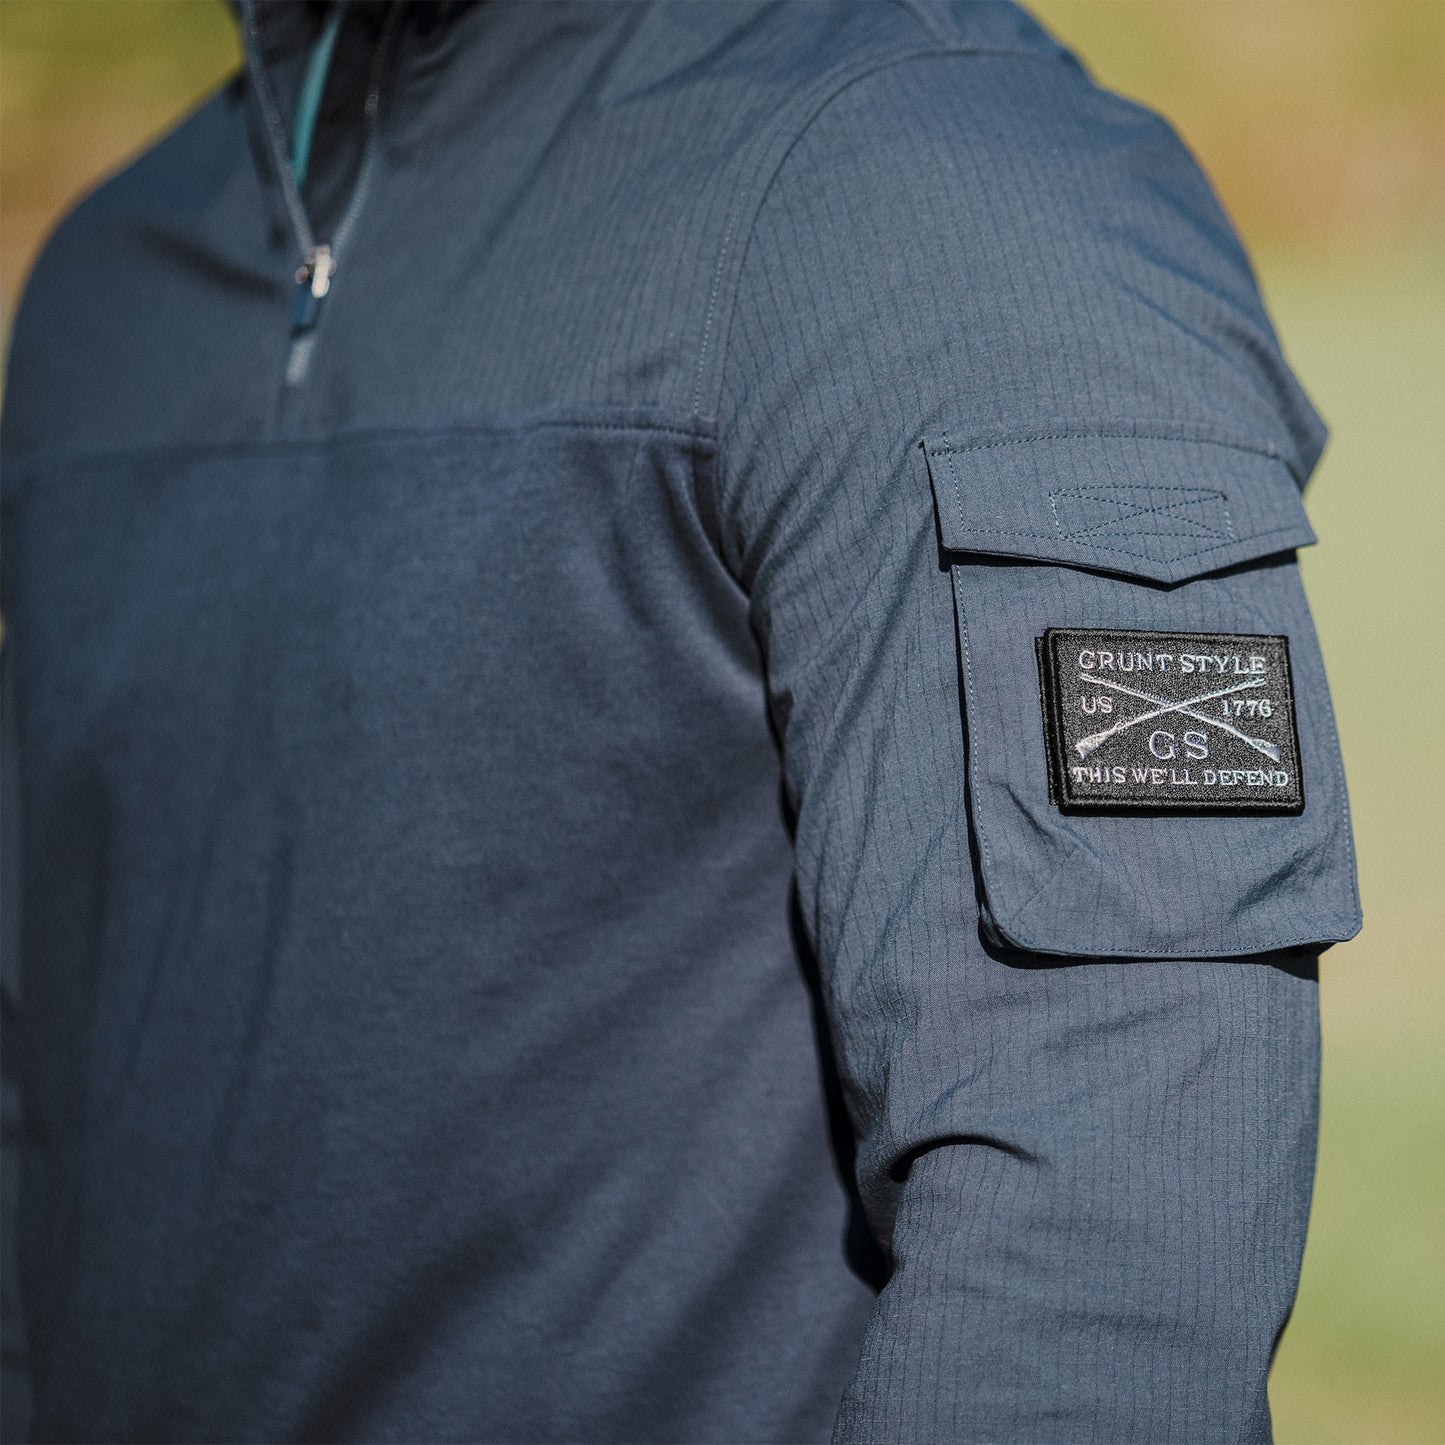 Military-Inspired Navy Blue Tactical Shirt for Patriots